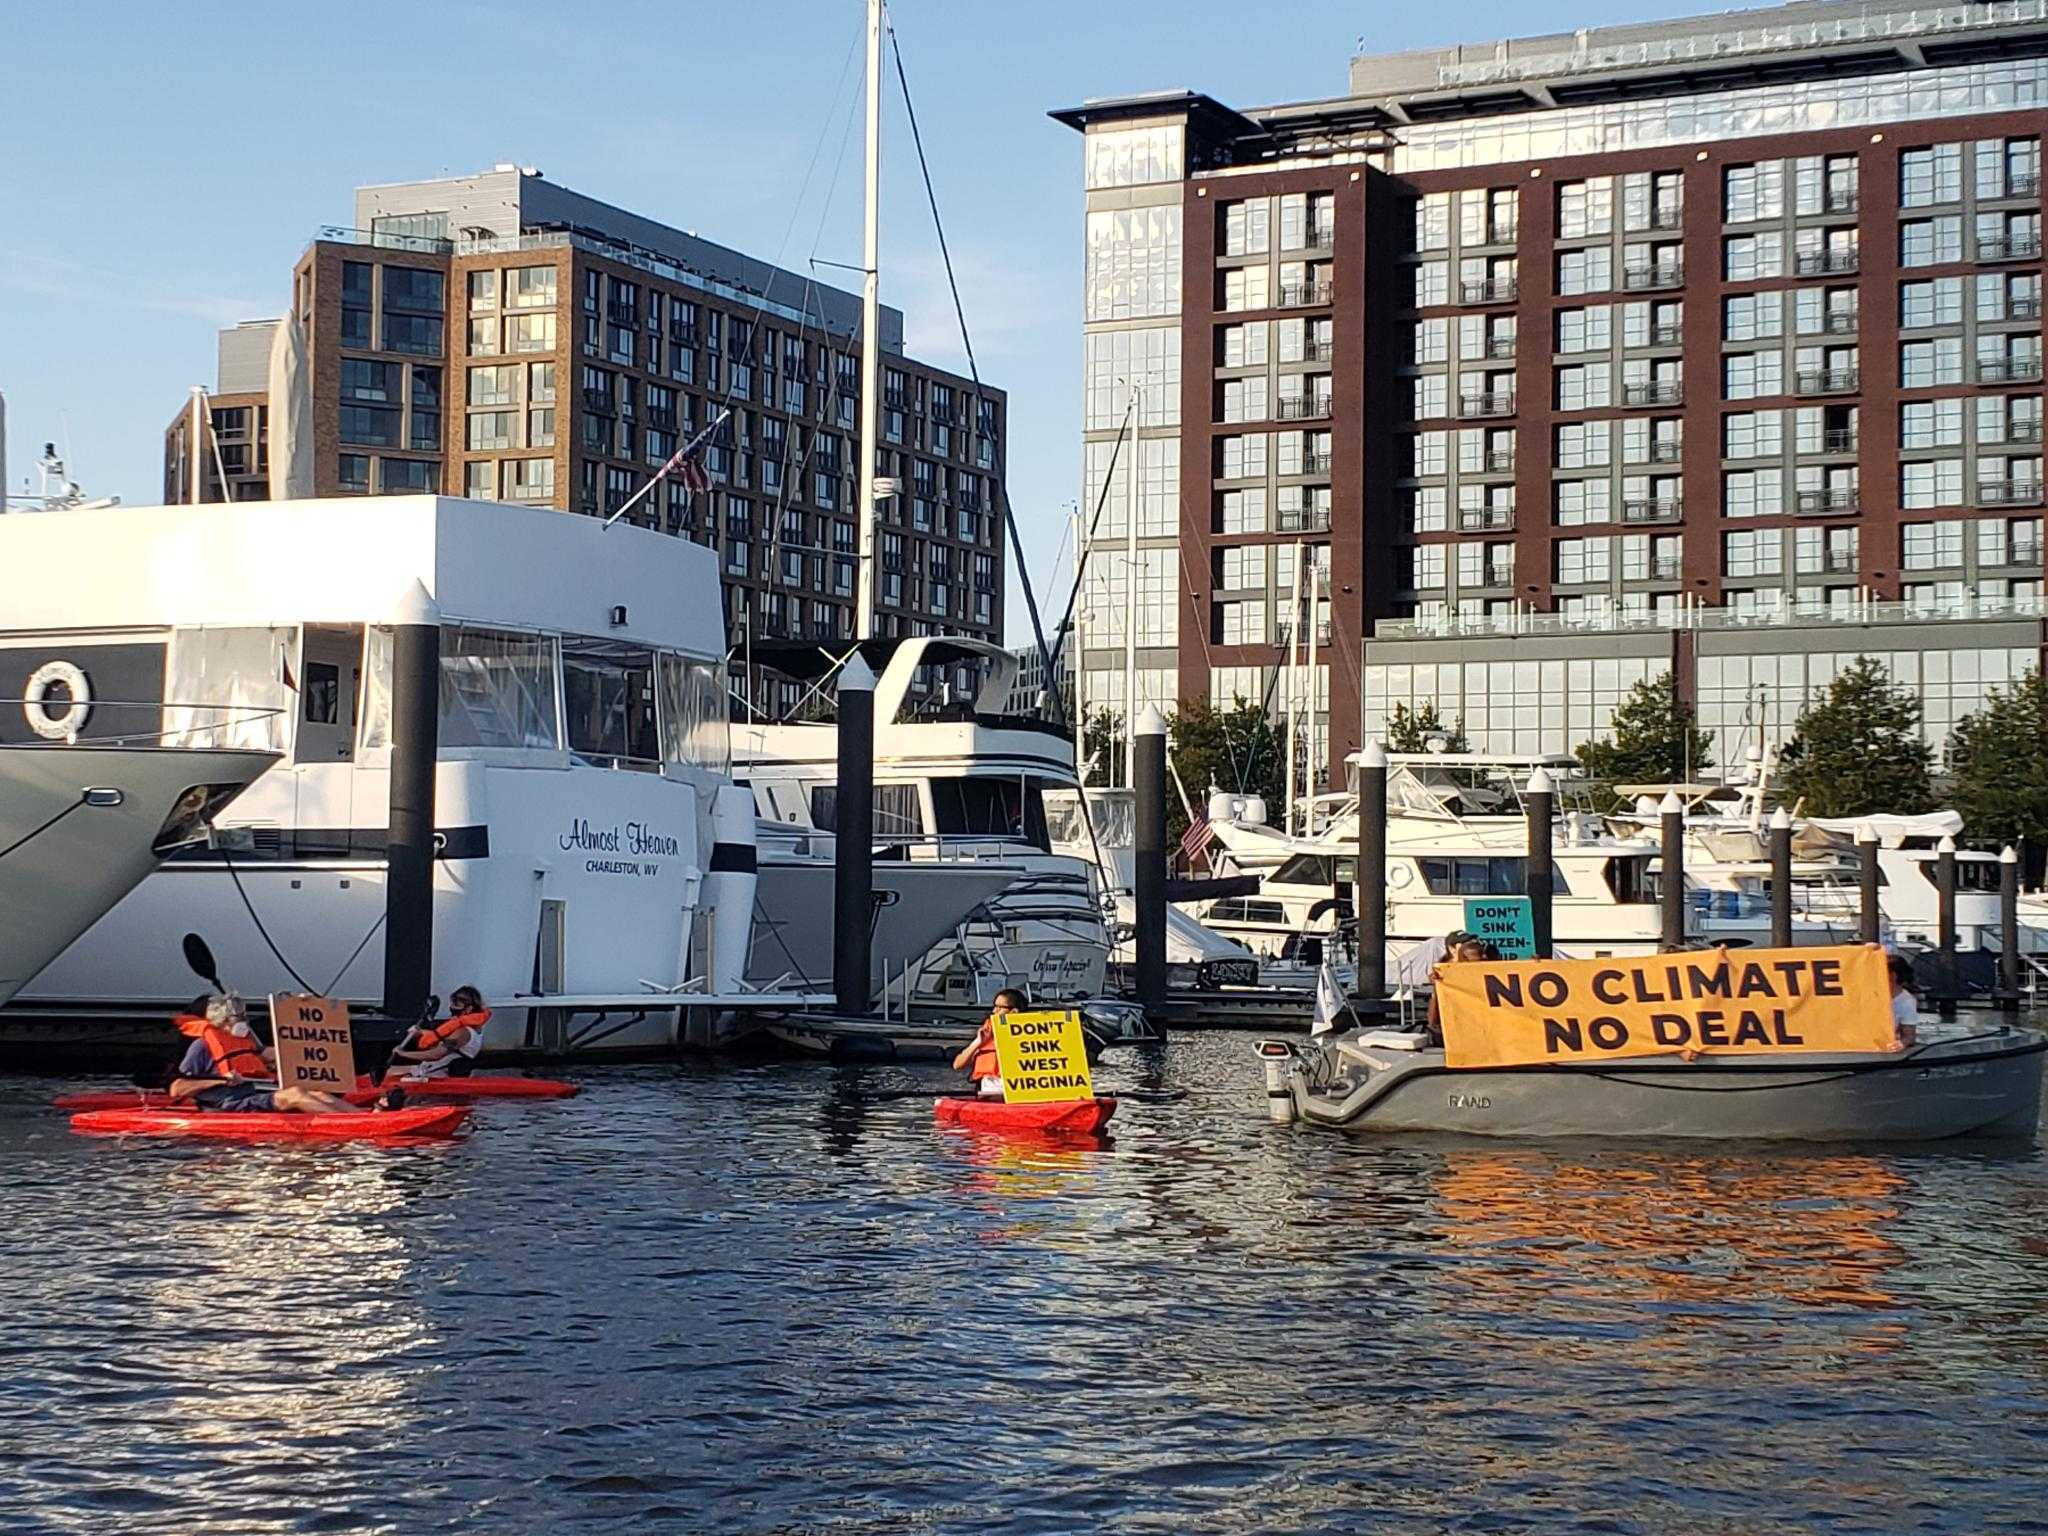 Activists protest Democrat senator’s opposition to Build Back Better, in boats